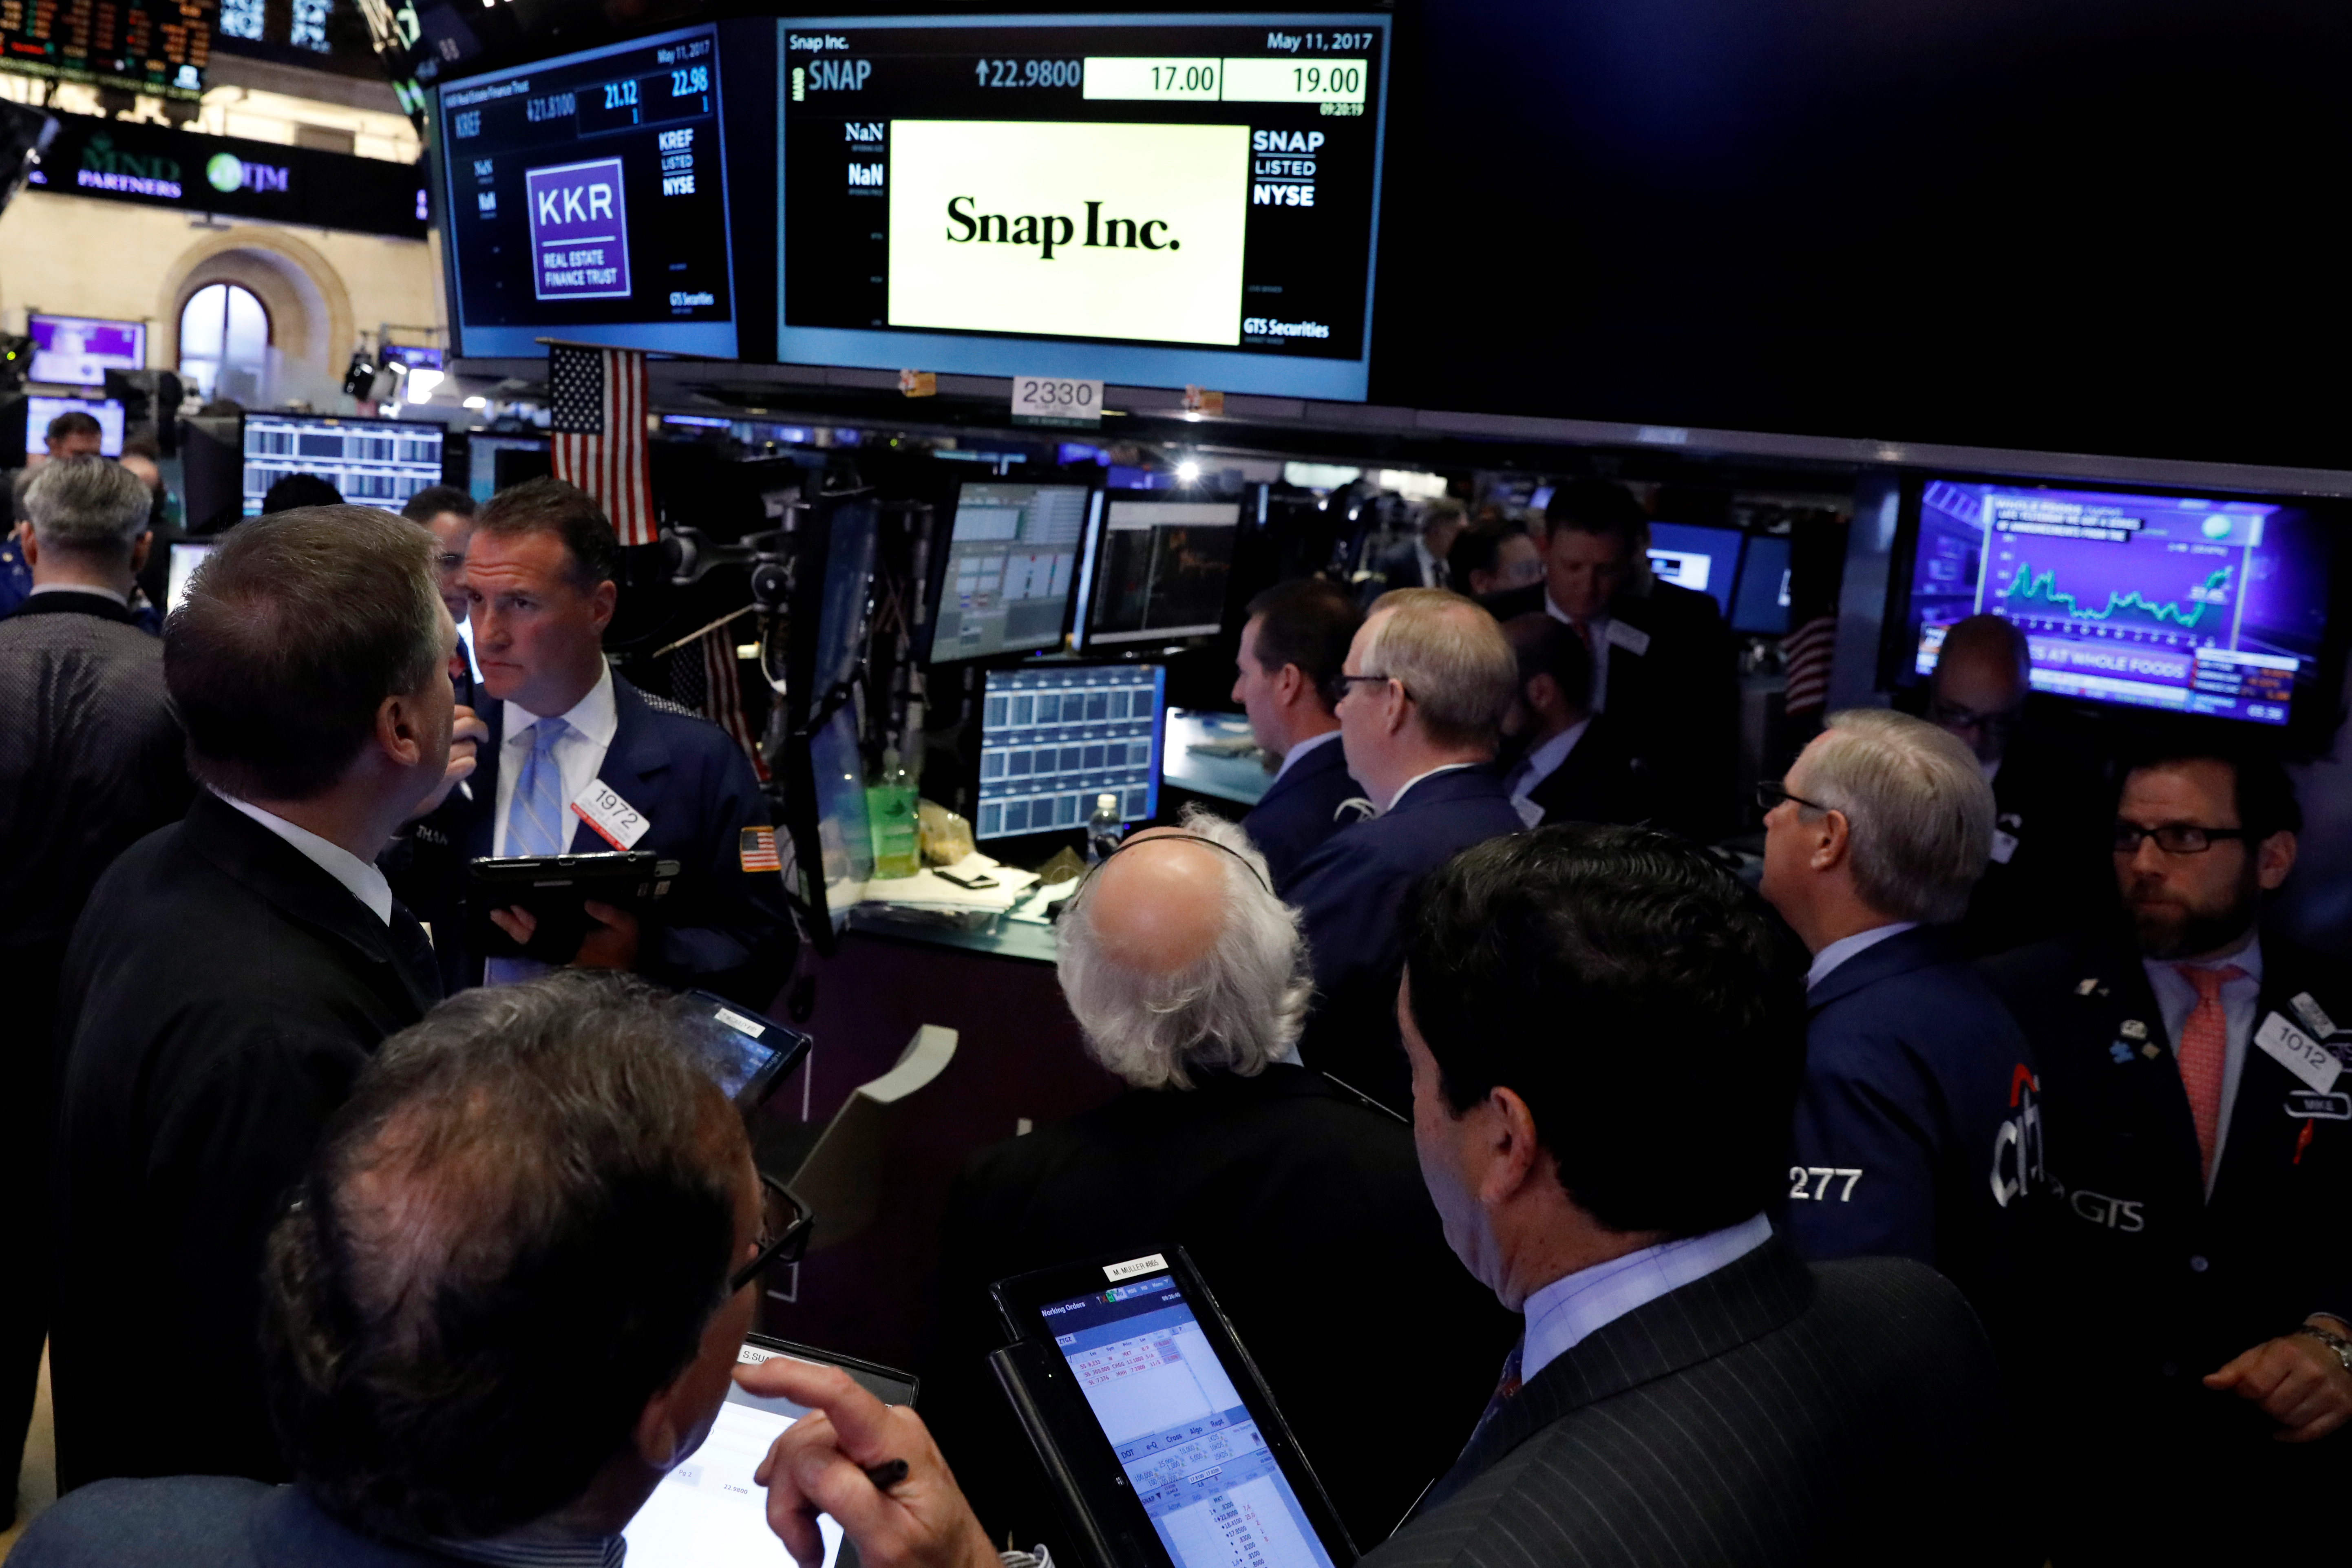 FILE PHOTO - Traders gather at the post where Snap Inc.. is traded, just before the opening bell on the floor of the NYSE in New York